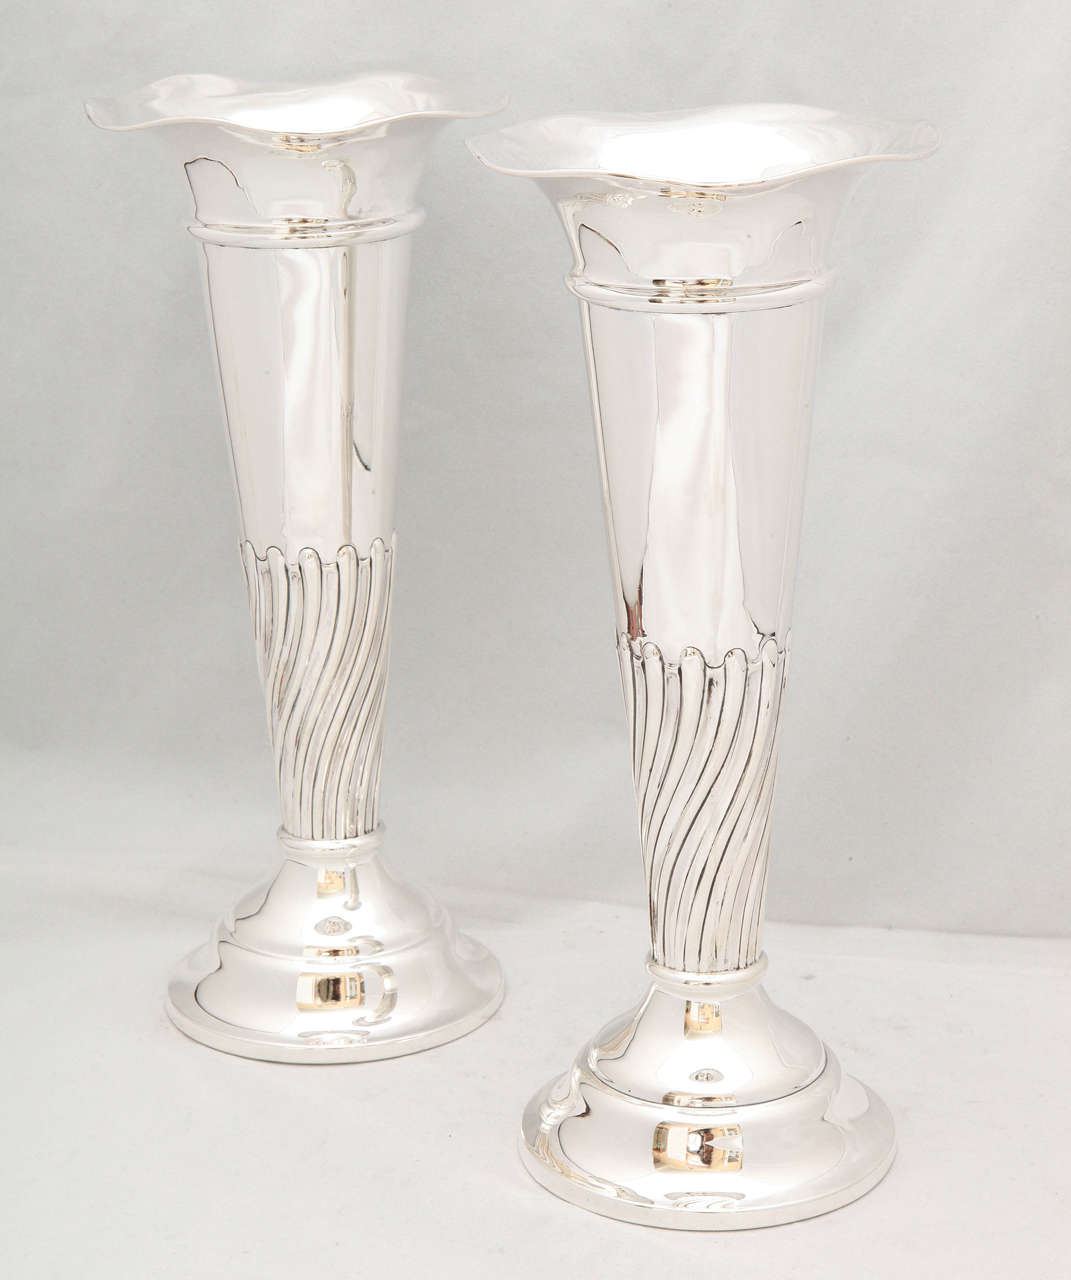 Edwardian pair of sterling silver vases, Birmingham, England, 1909, Wm. Hutton & Sons - makers. Each is 10